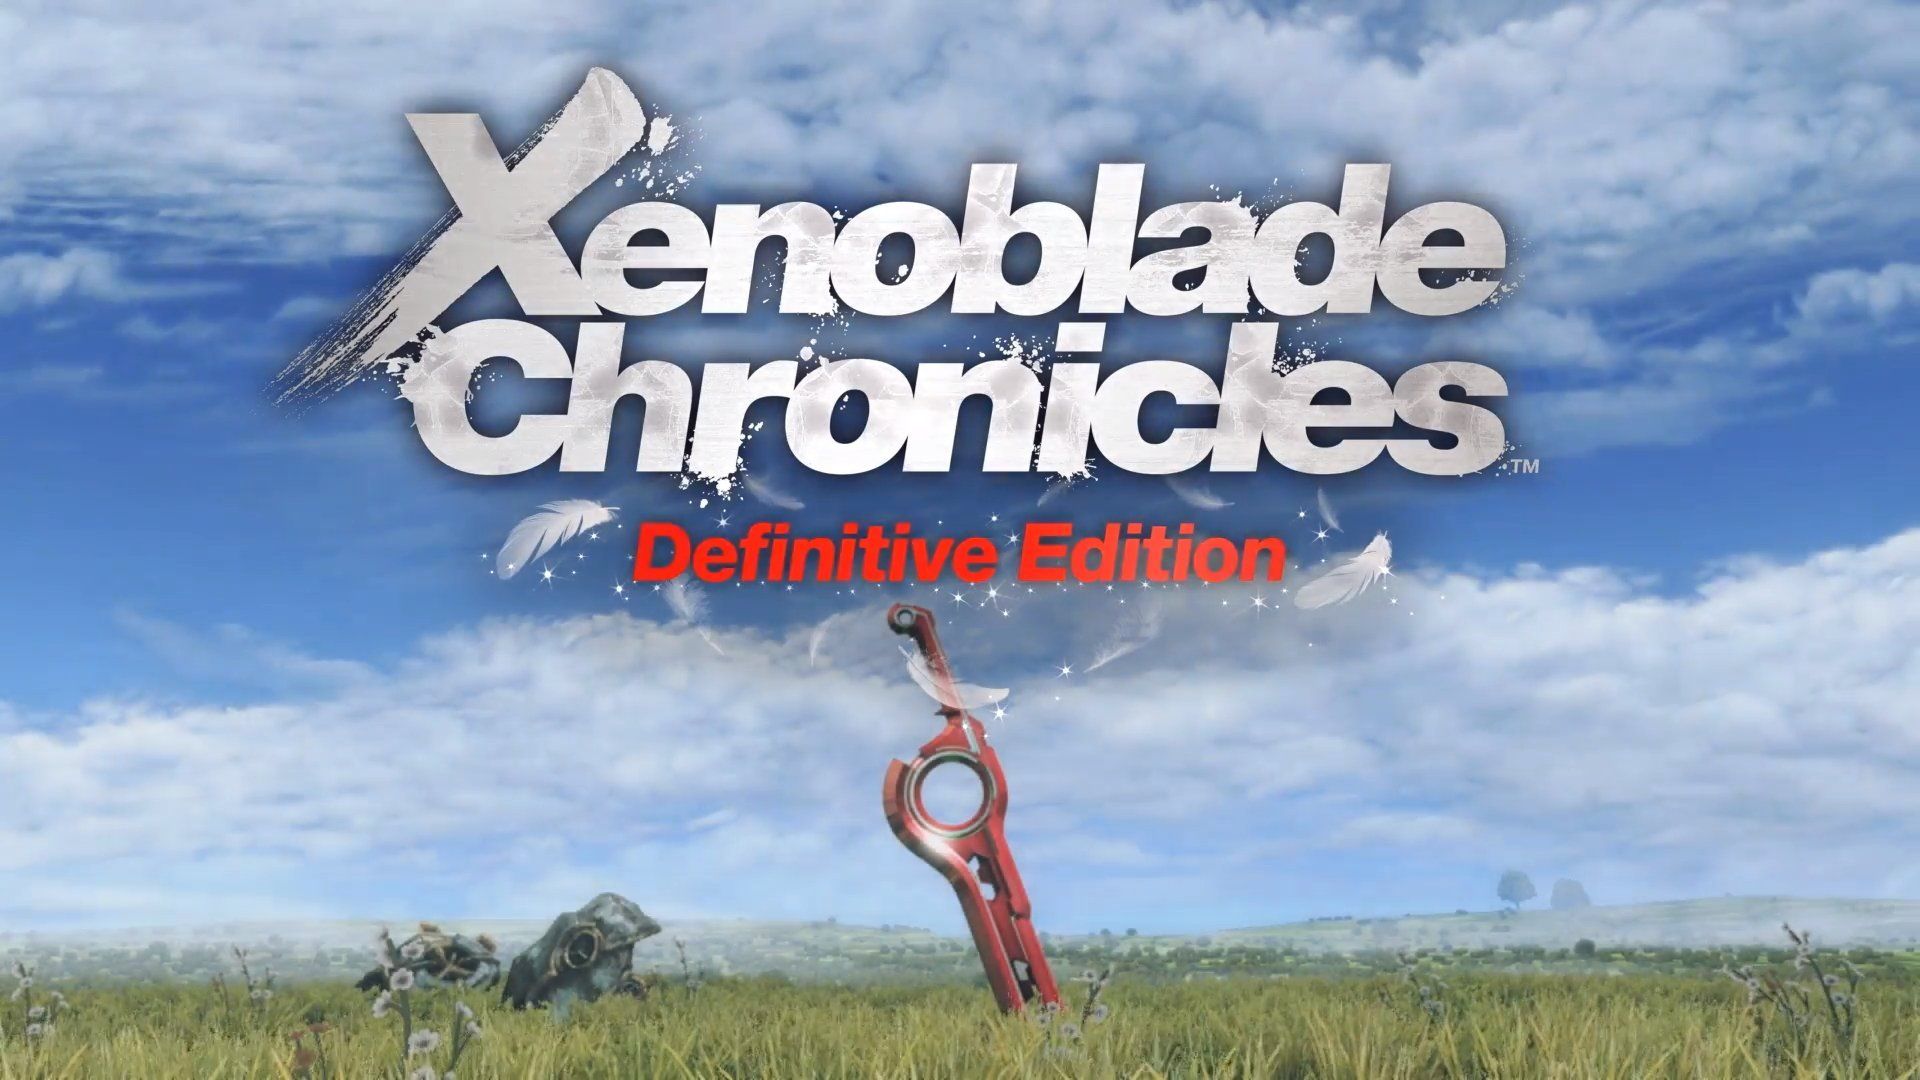 Xenoblade Chronicles: Definitive Edition is coming to Switch